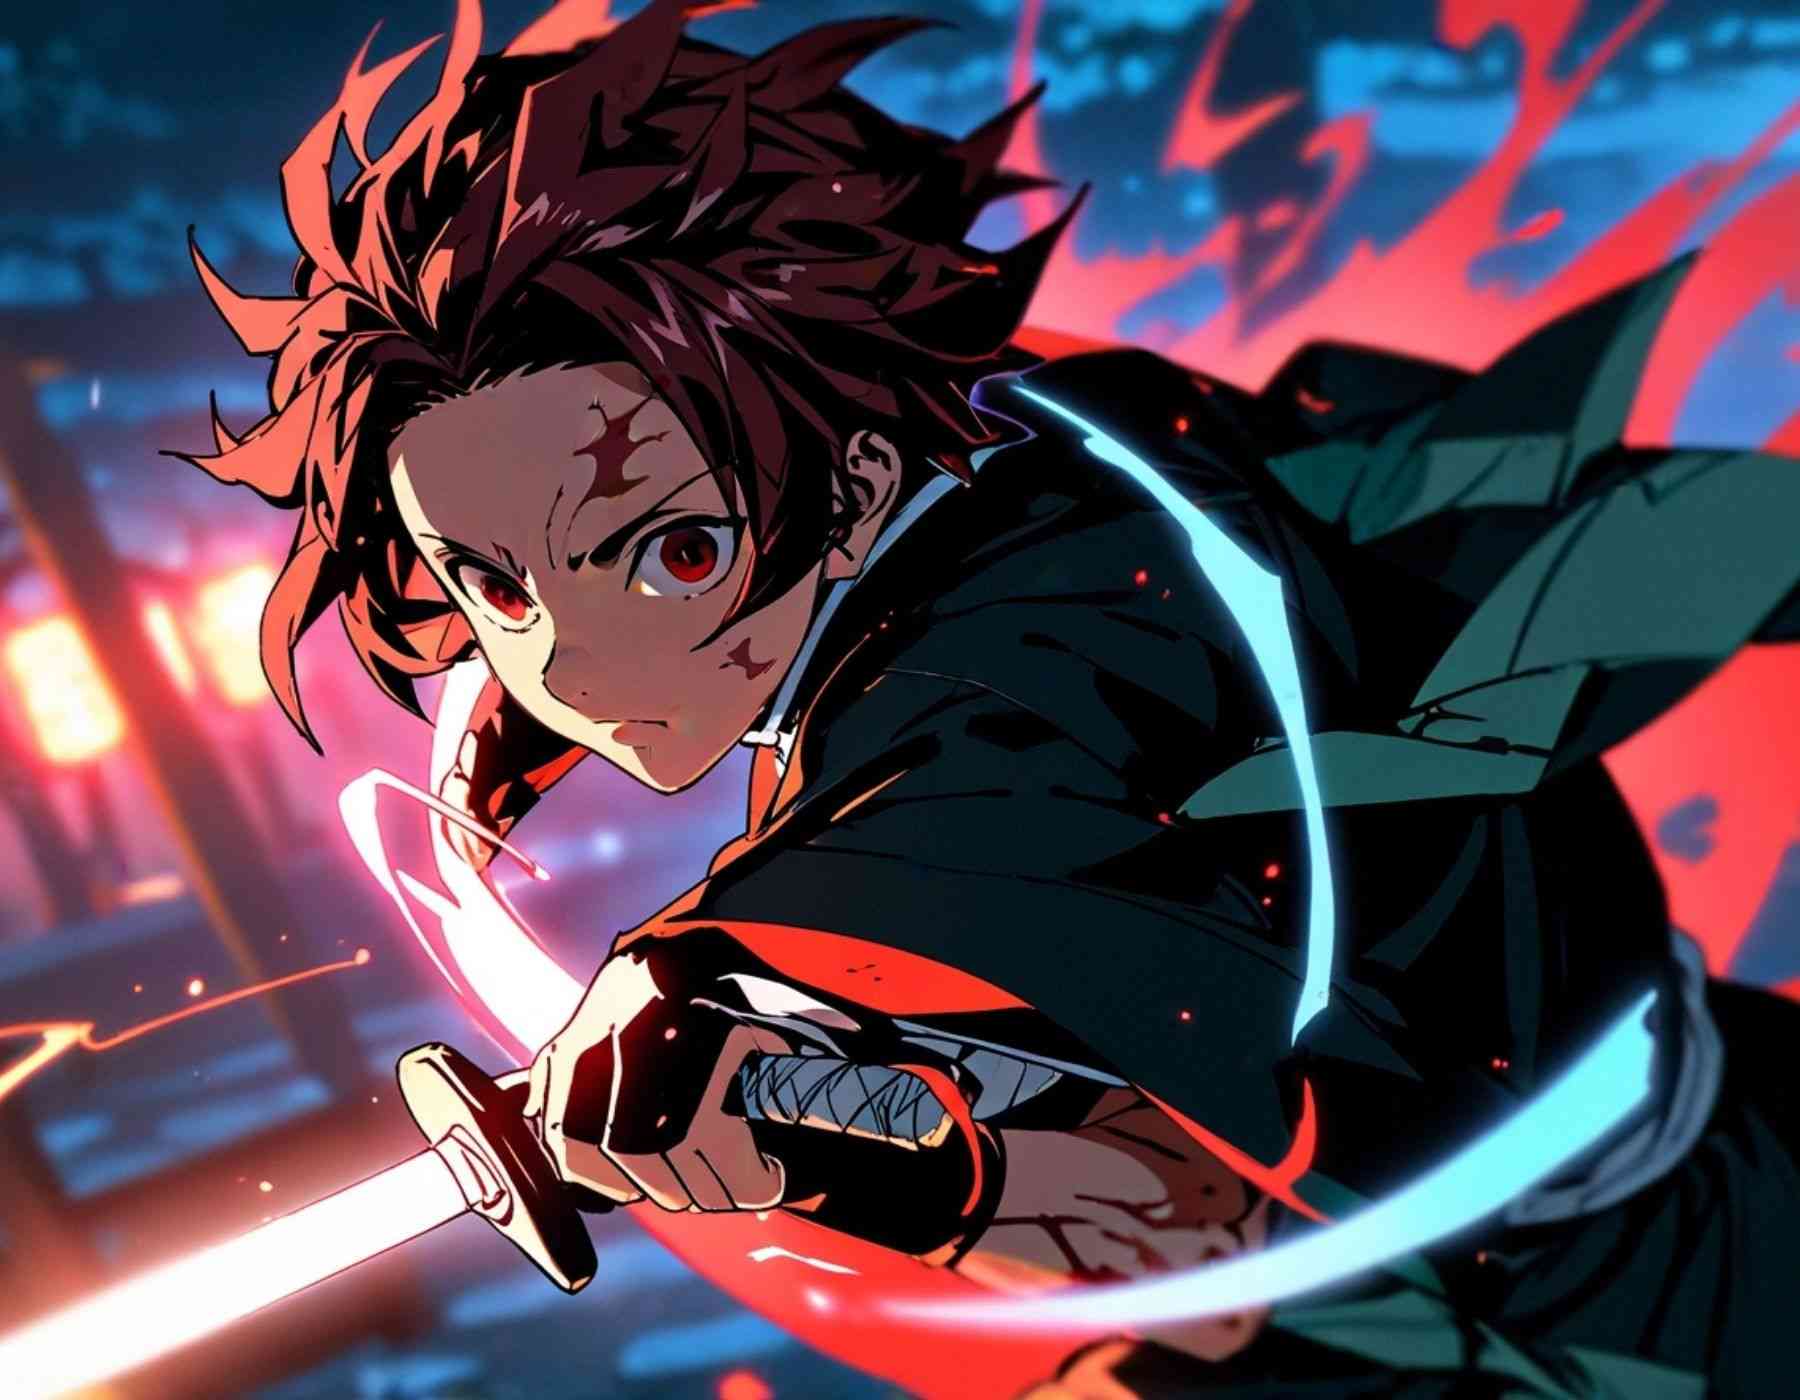 Tanjiro wielding a sword in a lively anime wallpaper.